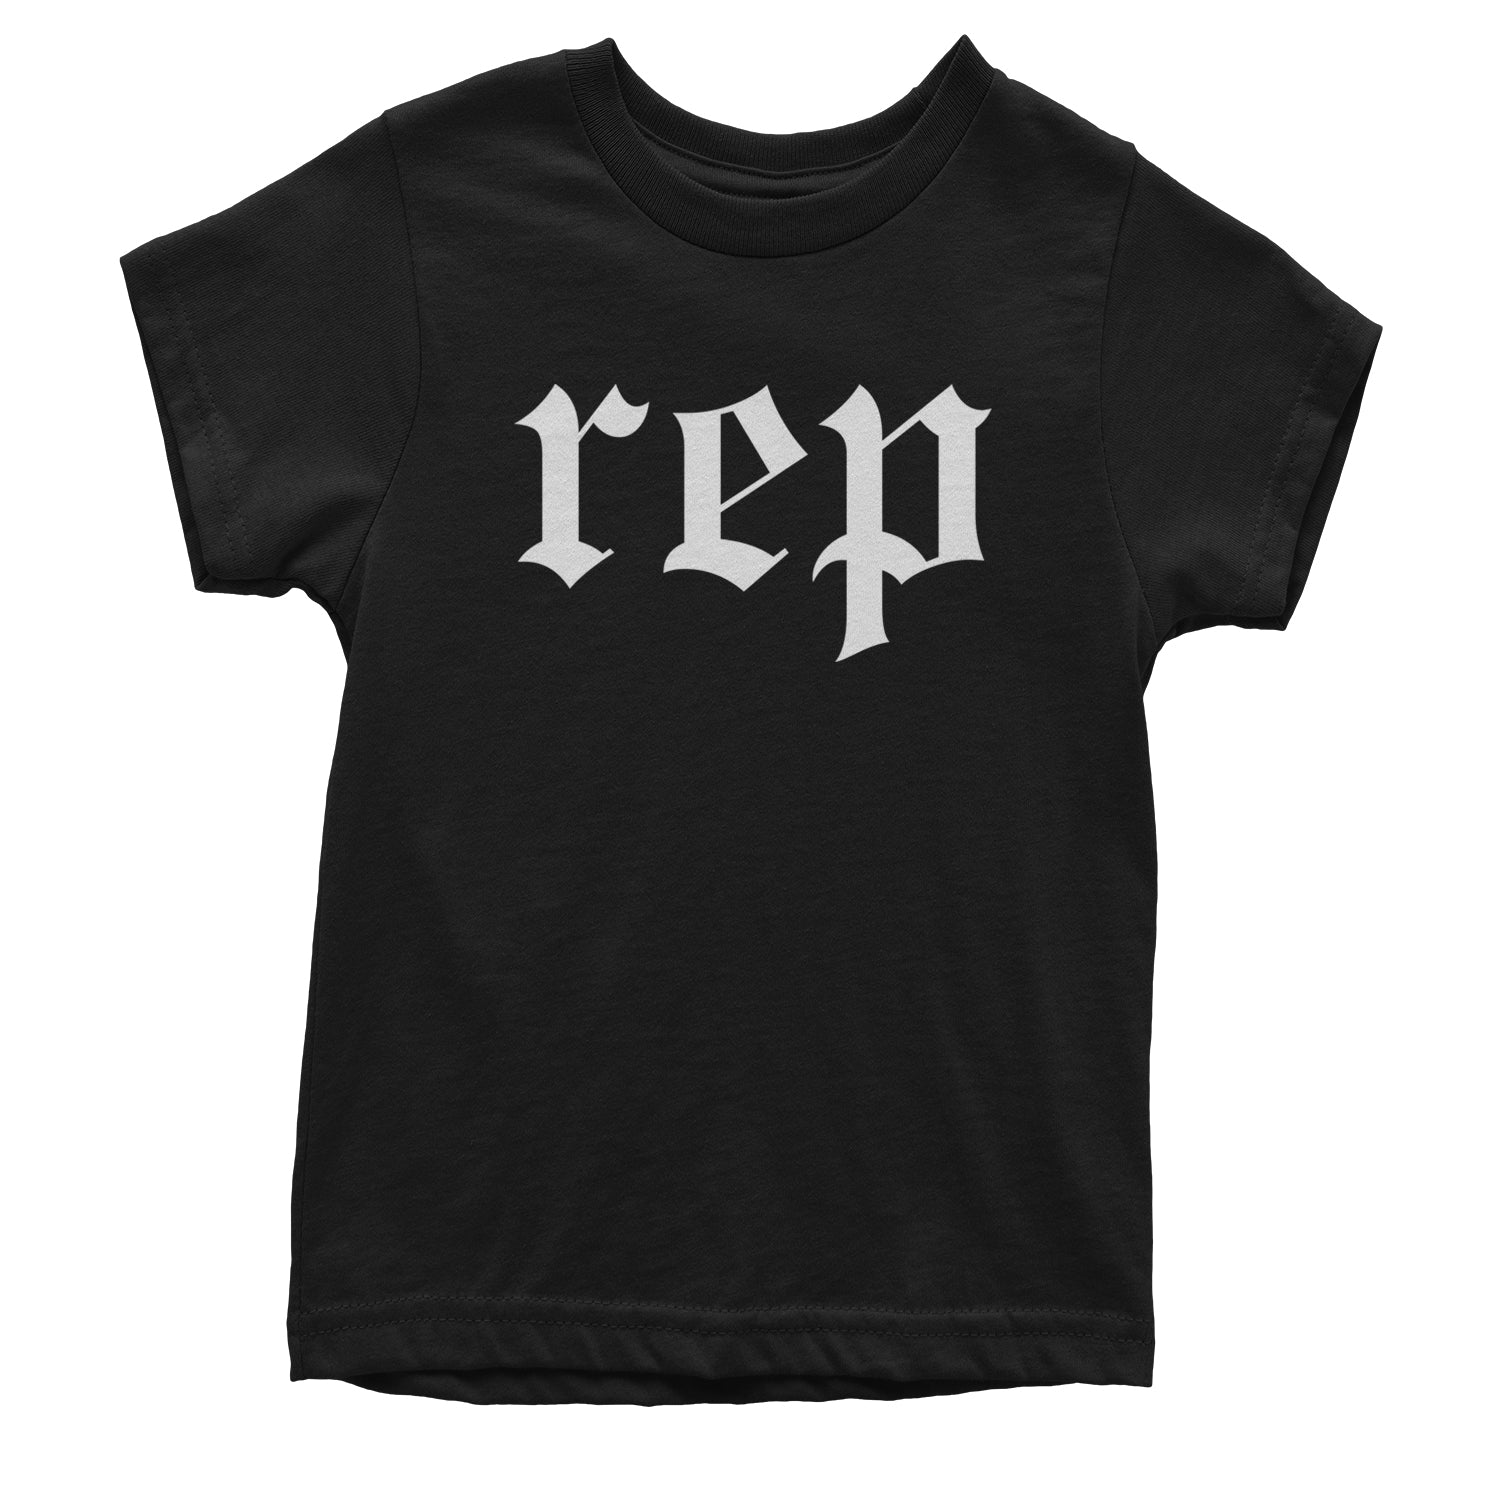 REP Reputation Music Lover Gift Fan Favorite Youth T-shirt